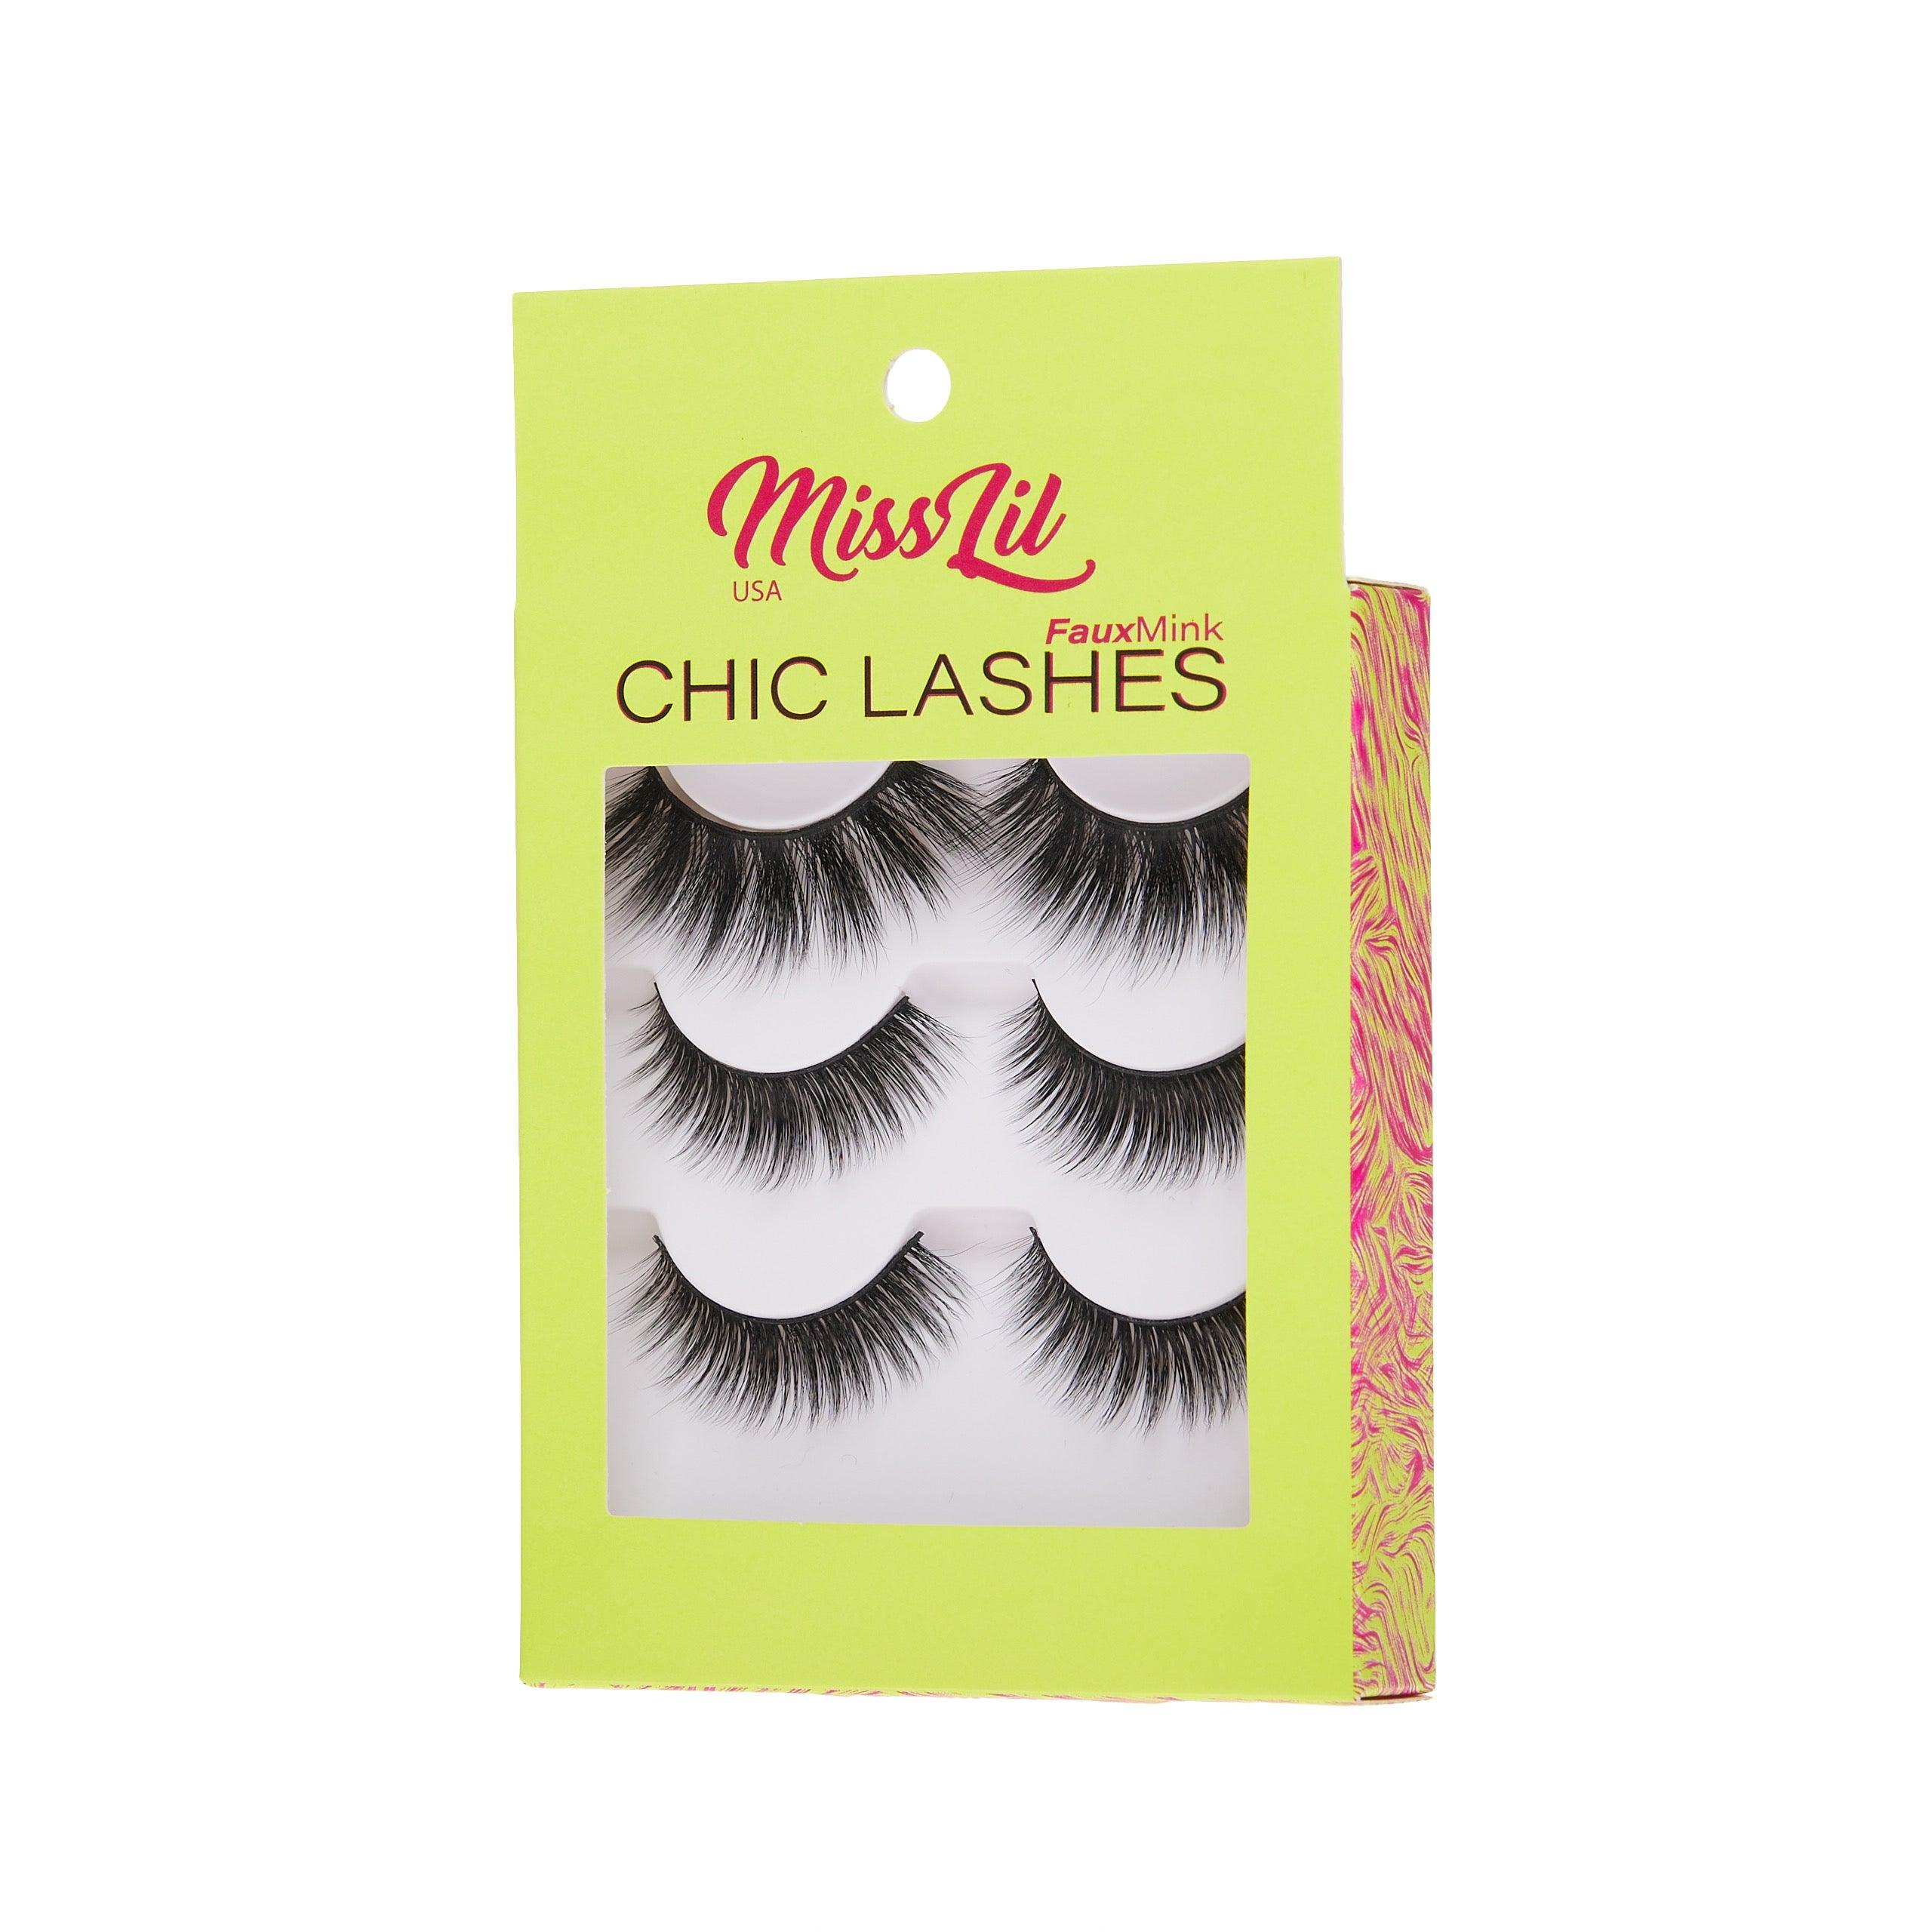 3-Pair Faux Mink Eyelashes - Chic Lashes Collection #32 - Pack of 3 - Miss Lil USA